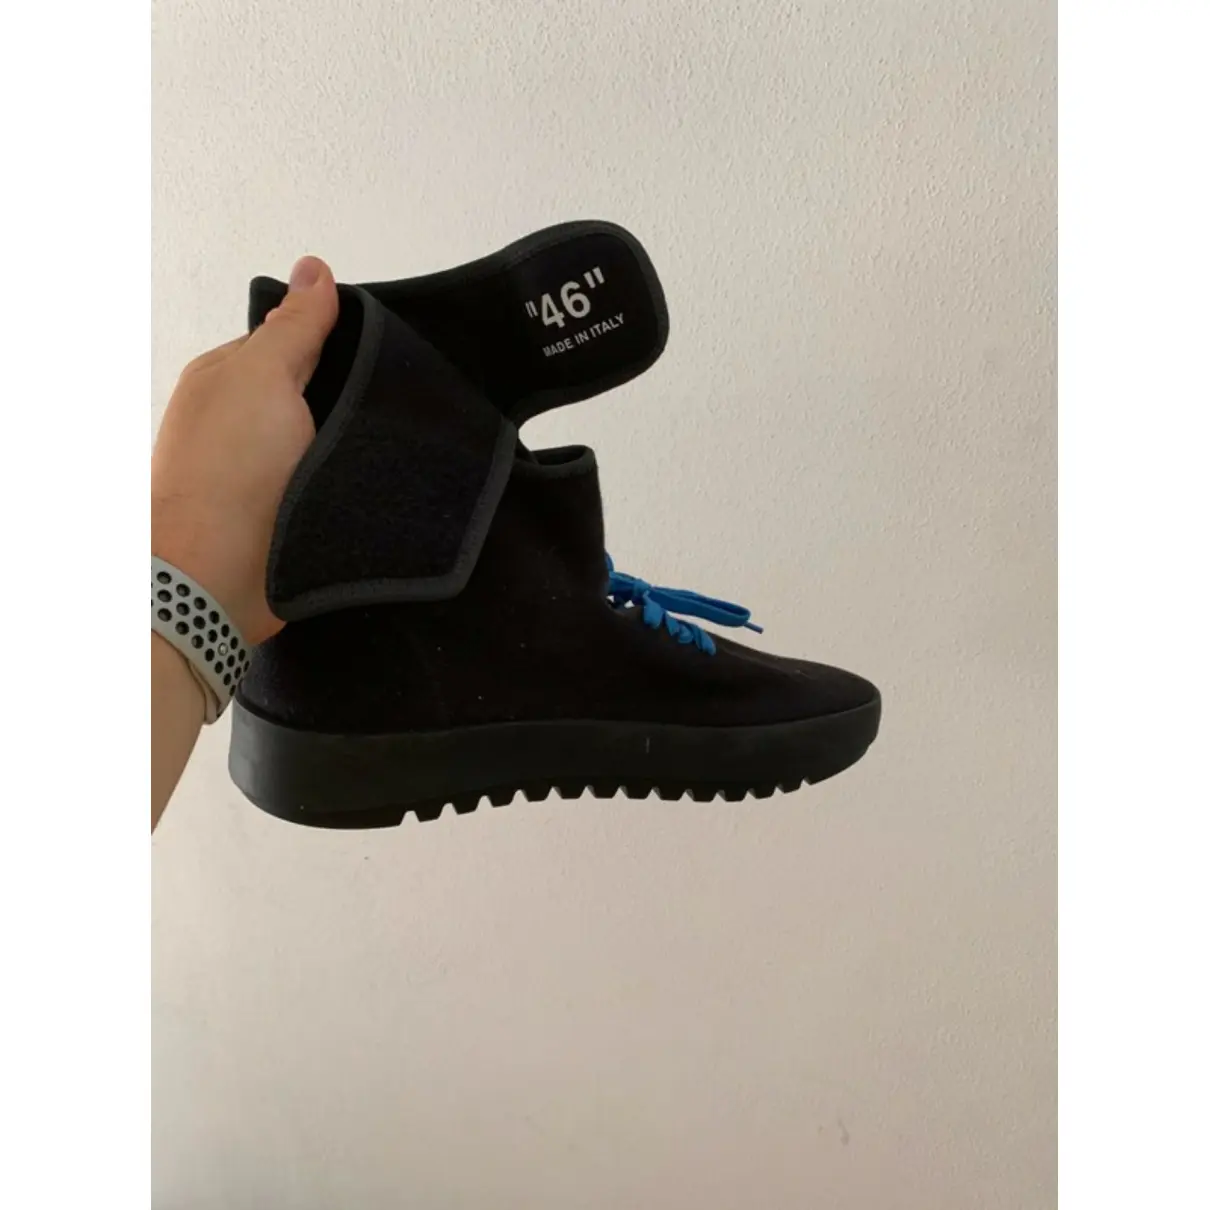 Buy Off-White CST-001 Moto Wrap cloth high trainers online